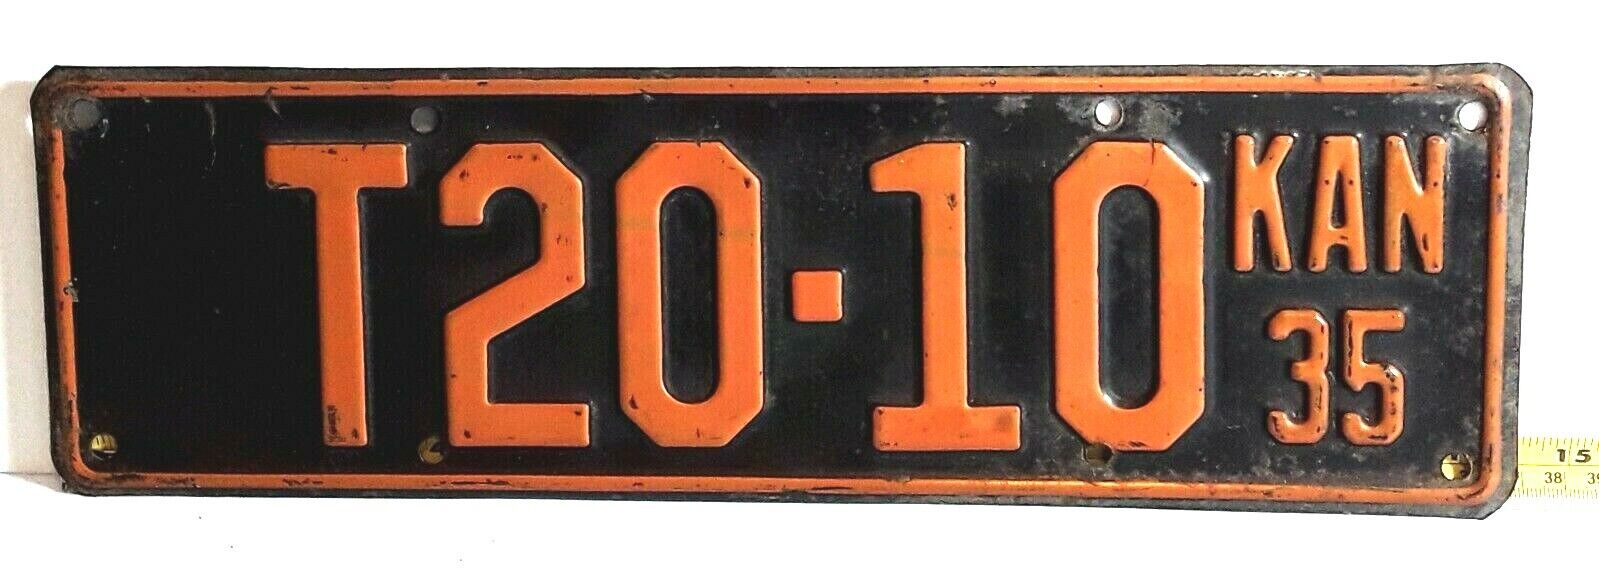 KANSAS - 1935 TRUCK license plate - good looking original, from Marshall County